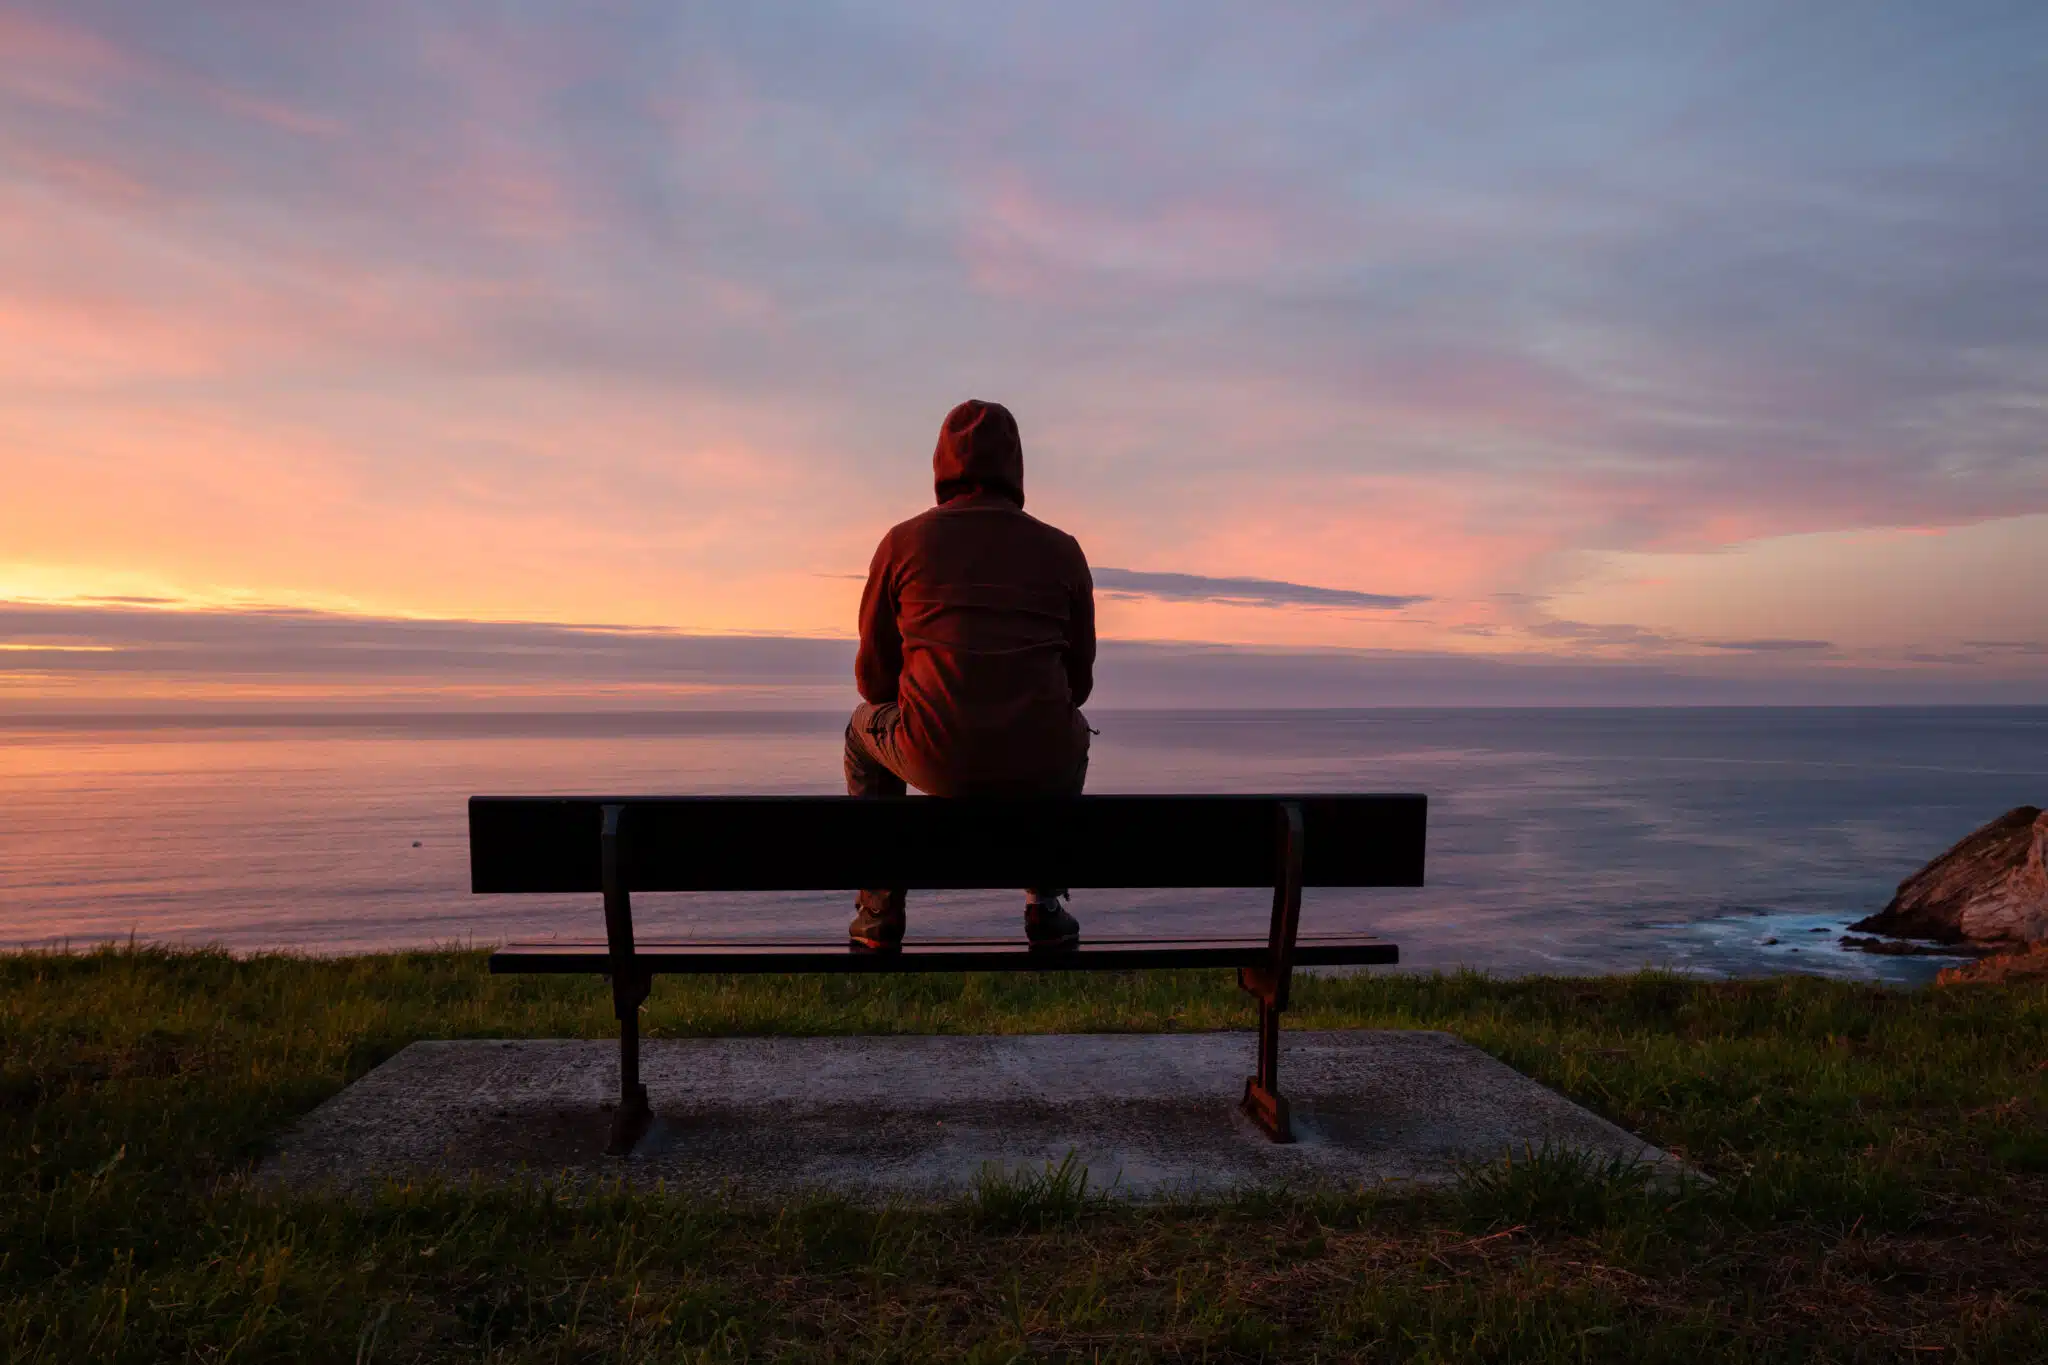 Lonely man sits alone on the rocky coast and enjoying sunset. View over rocky cliff to ocean horizon